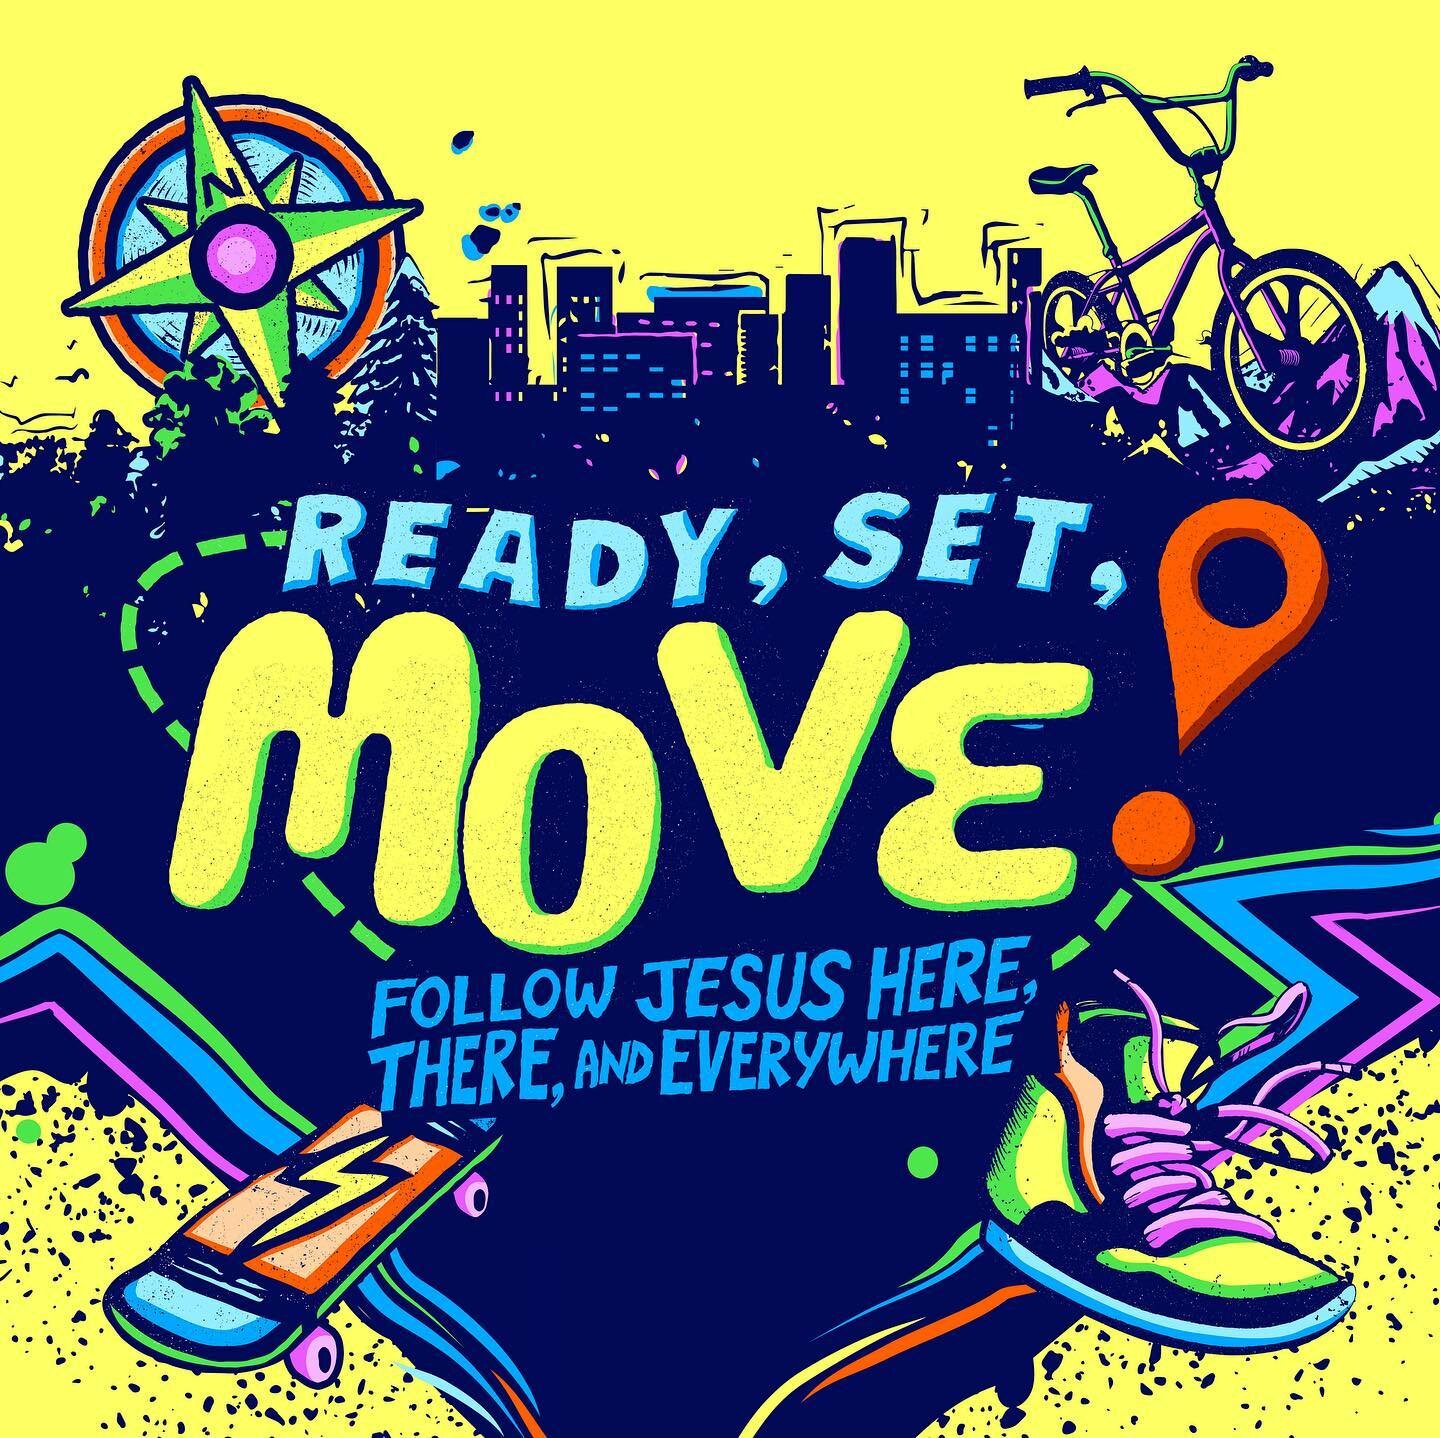 Register today for Very Best Summer 2023! June 6th-9th | 6-8:30 PM | Cox Elementary, Roanoke, TX Register here to secure your spot: 
https://crosscrown.churchcenter.com/registrations/events/category/62902